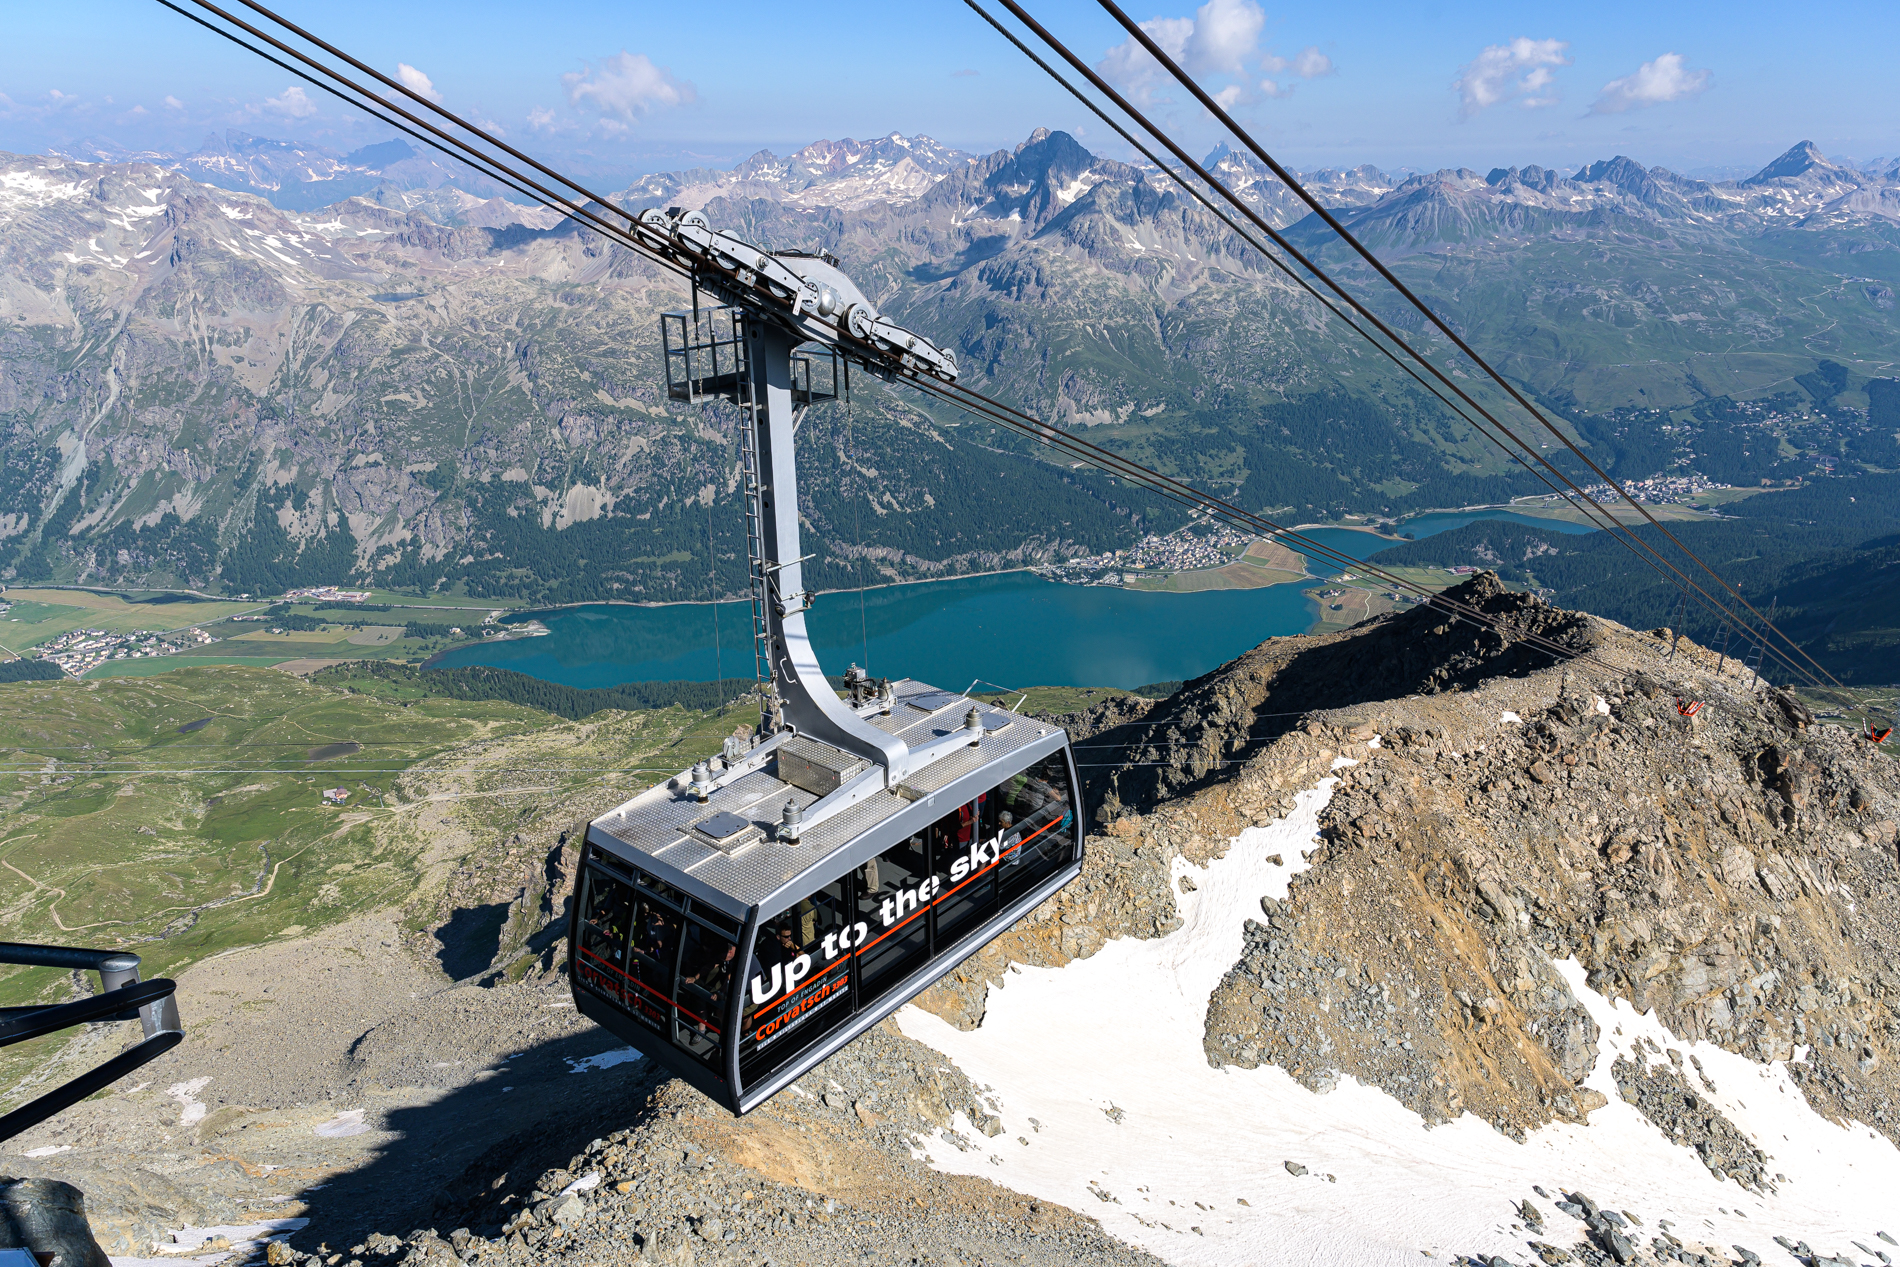 Corvatsch cable car return ticket